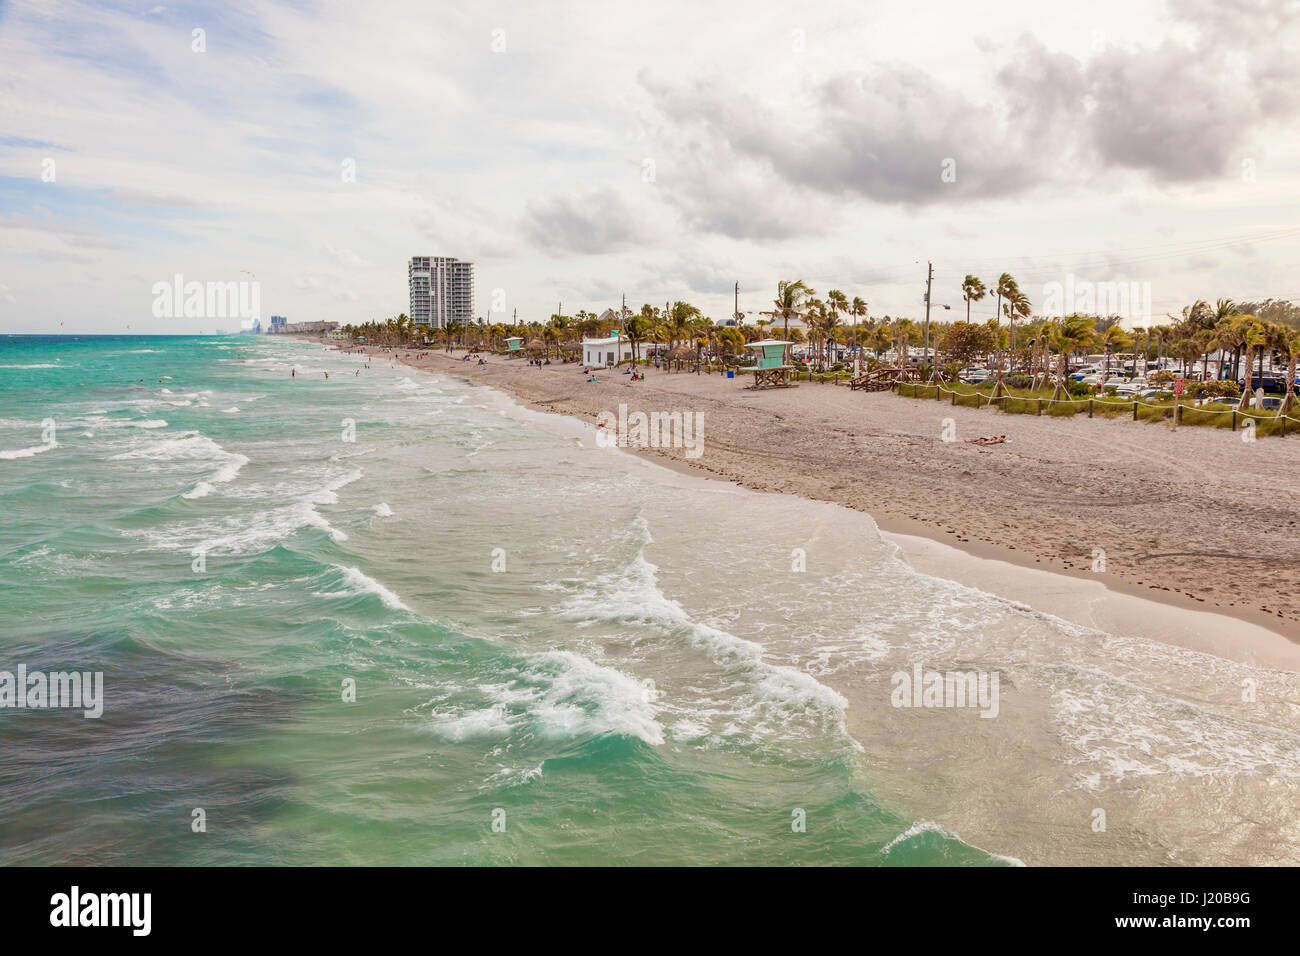 Dania Beach, Fl, USA - March 13, 2017: Coastline at the Dania Beach on a cloudy day in March. Florida, United States Stock Photo